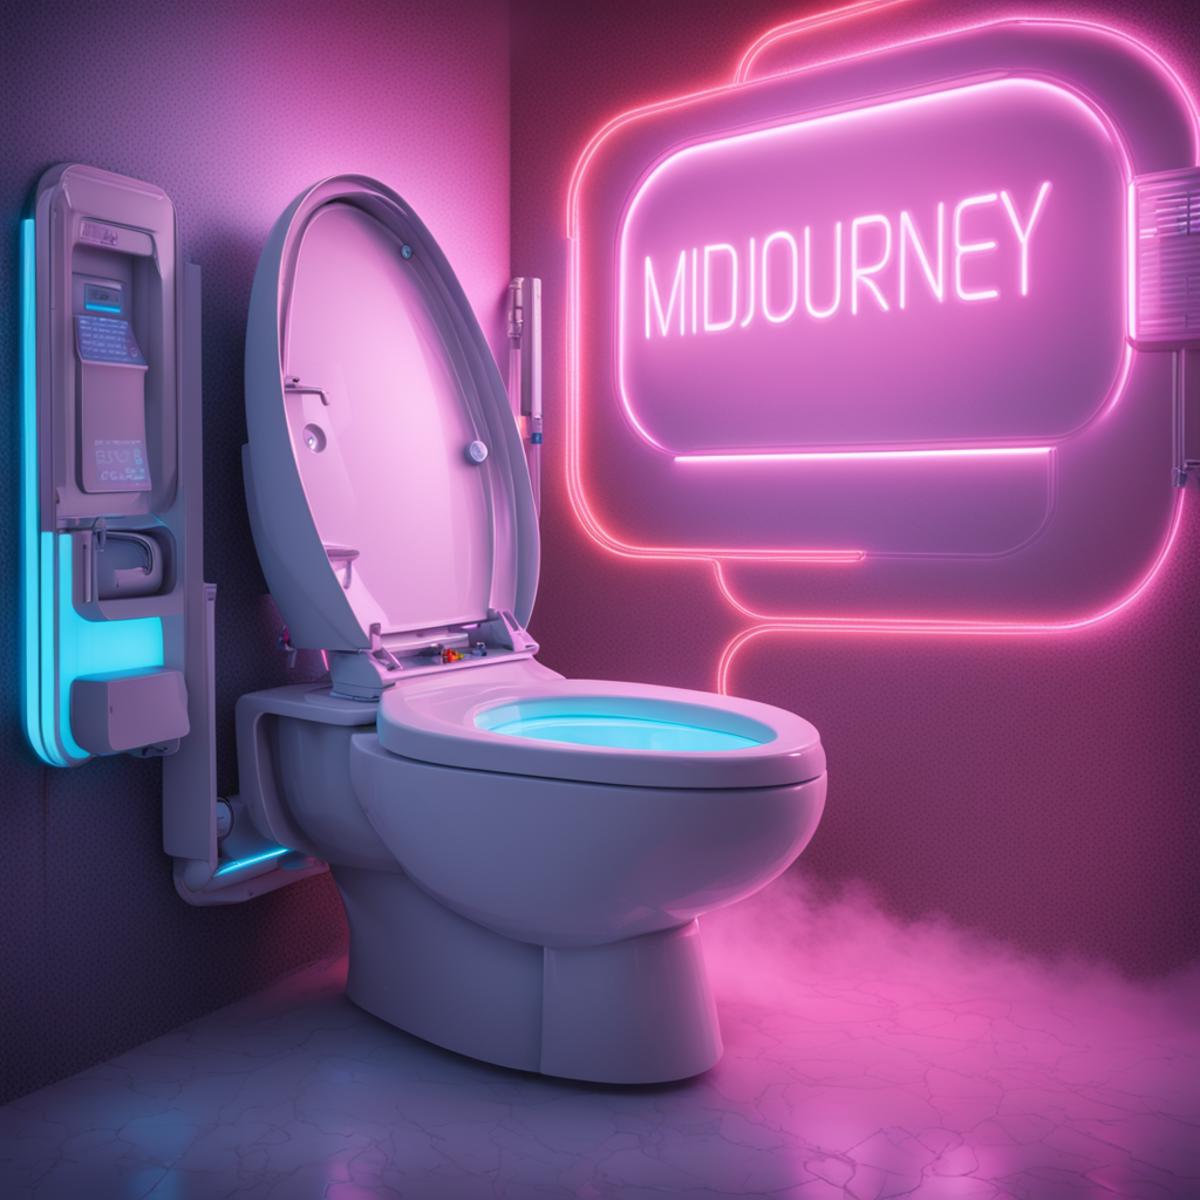 A white toilet with neon lighting in a bathroom.